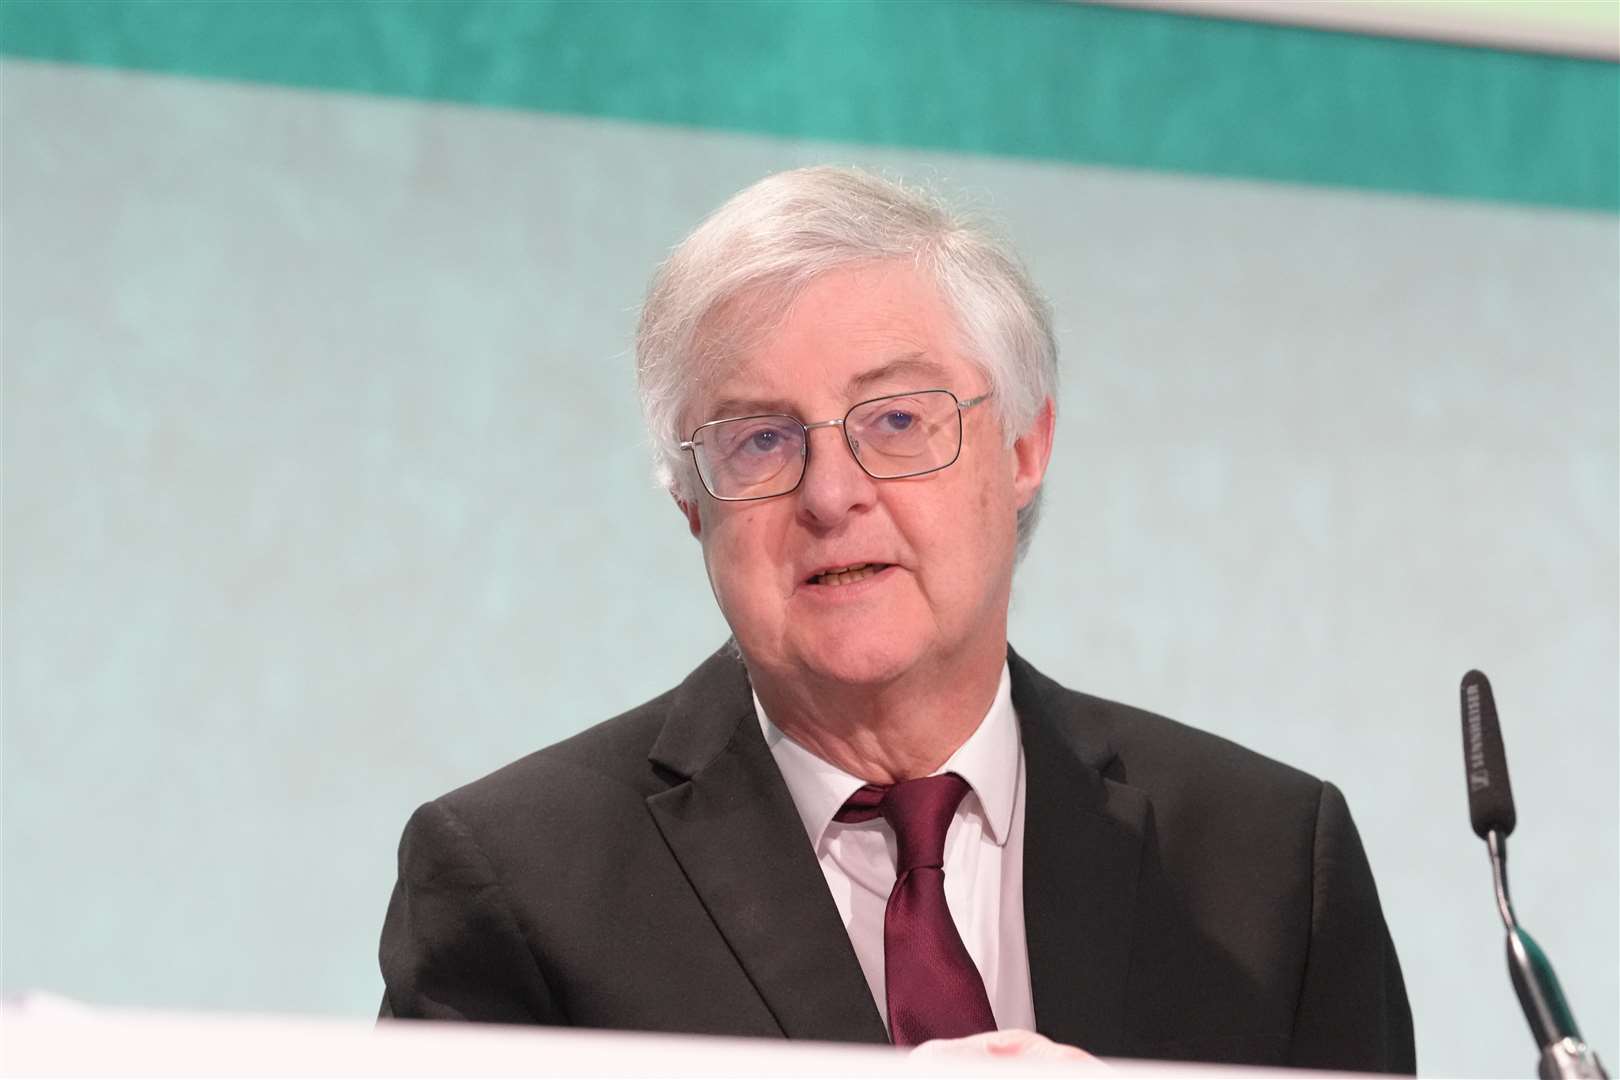 Mark Drakeford, First Minister of Wales, is expected to appear at the inquiry hearing in Cardiff (Maja Smiejkowska/PA)